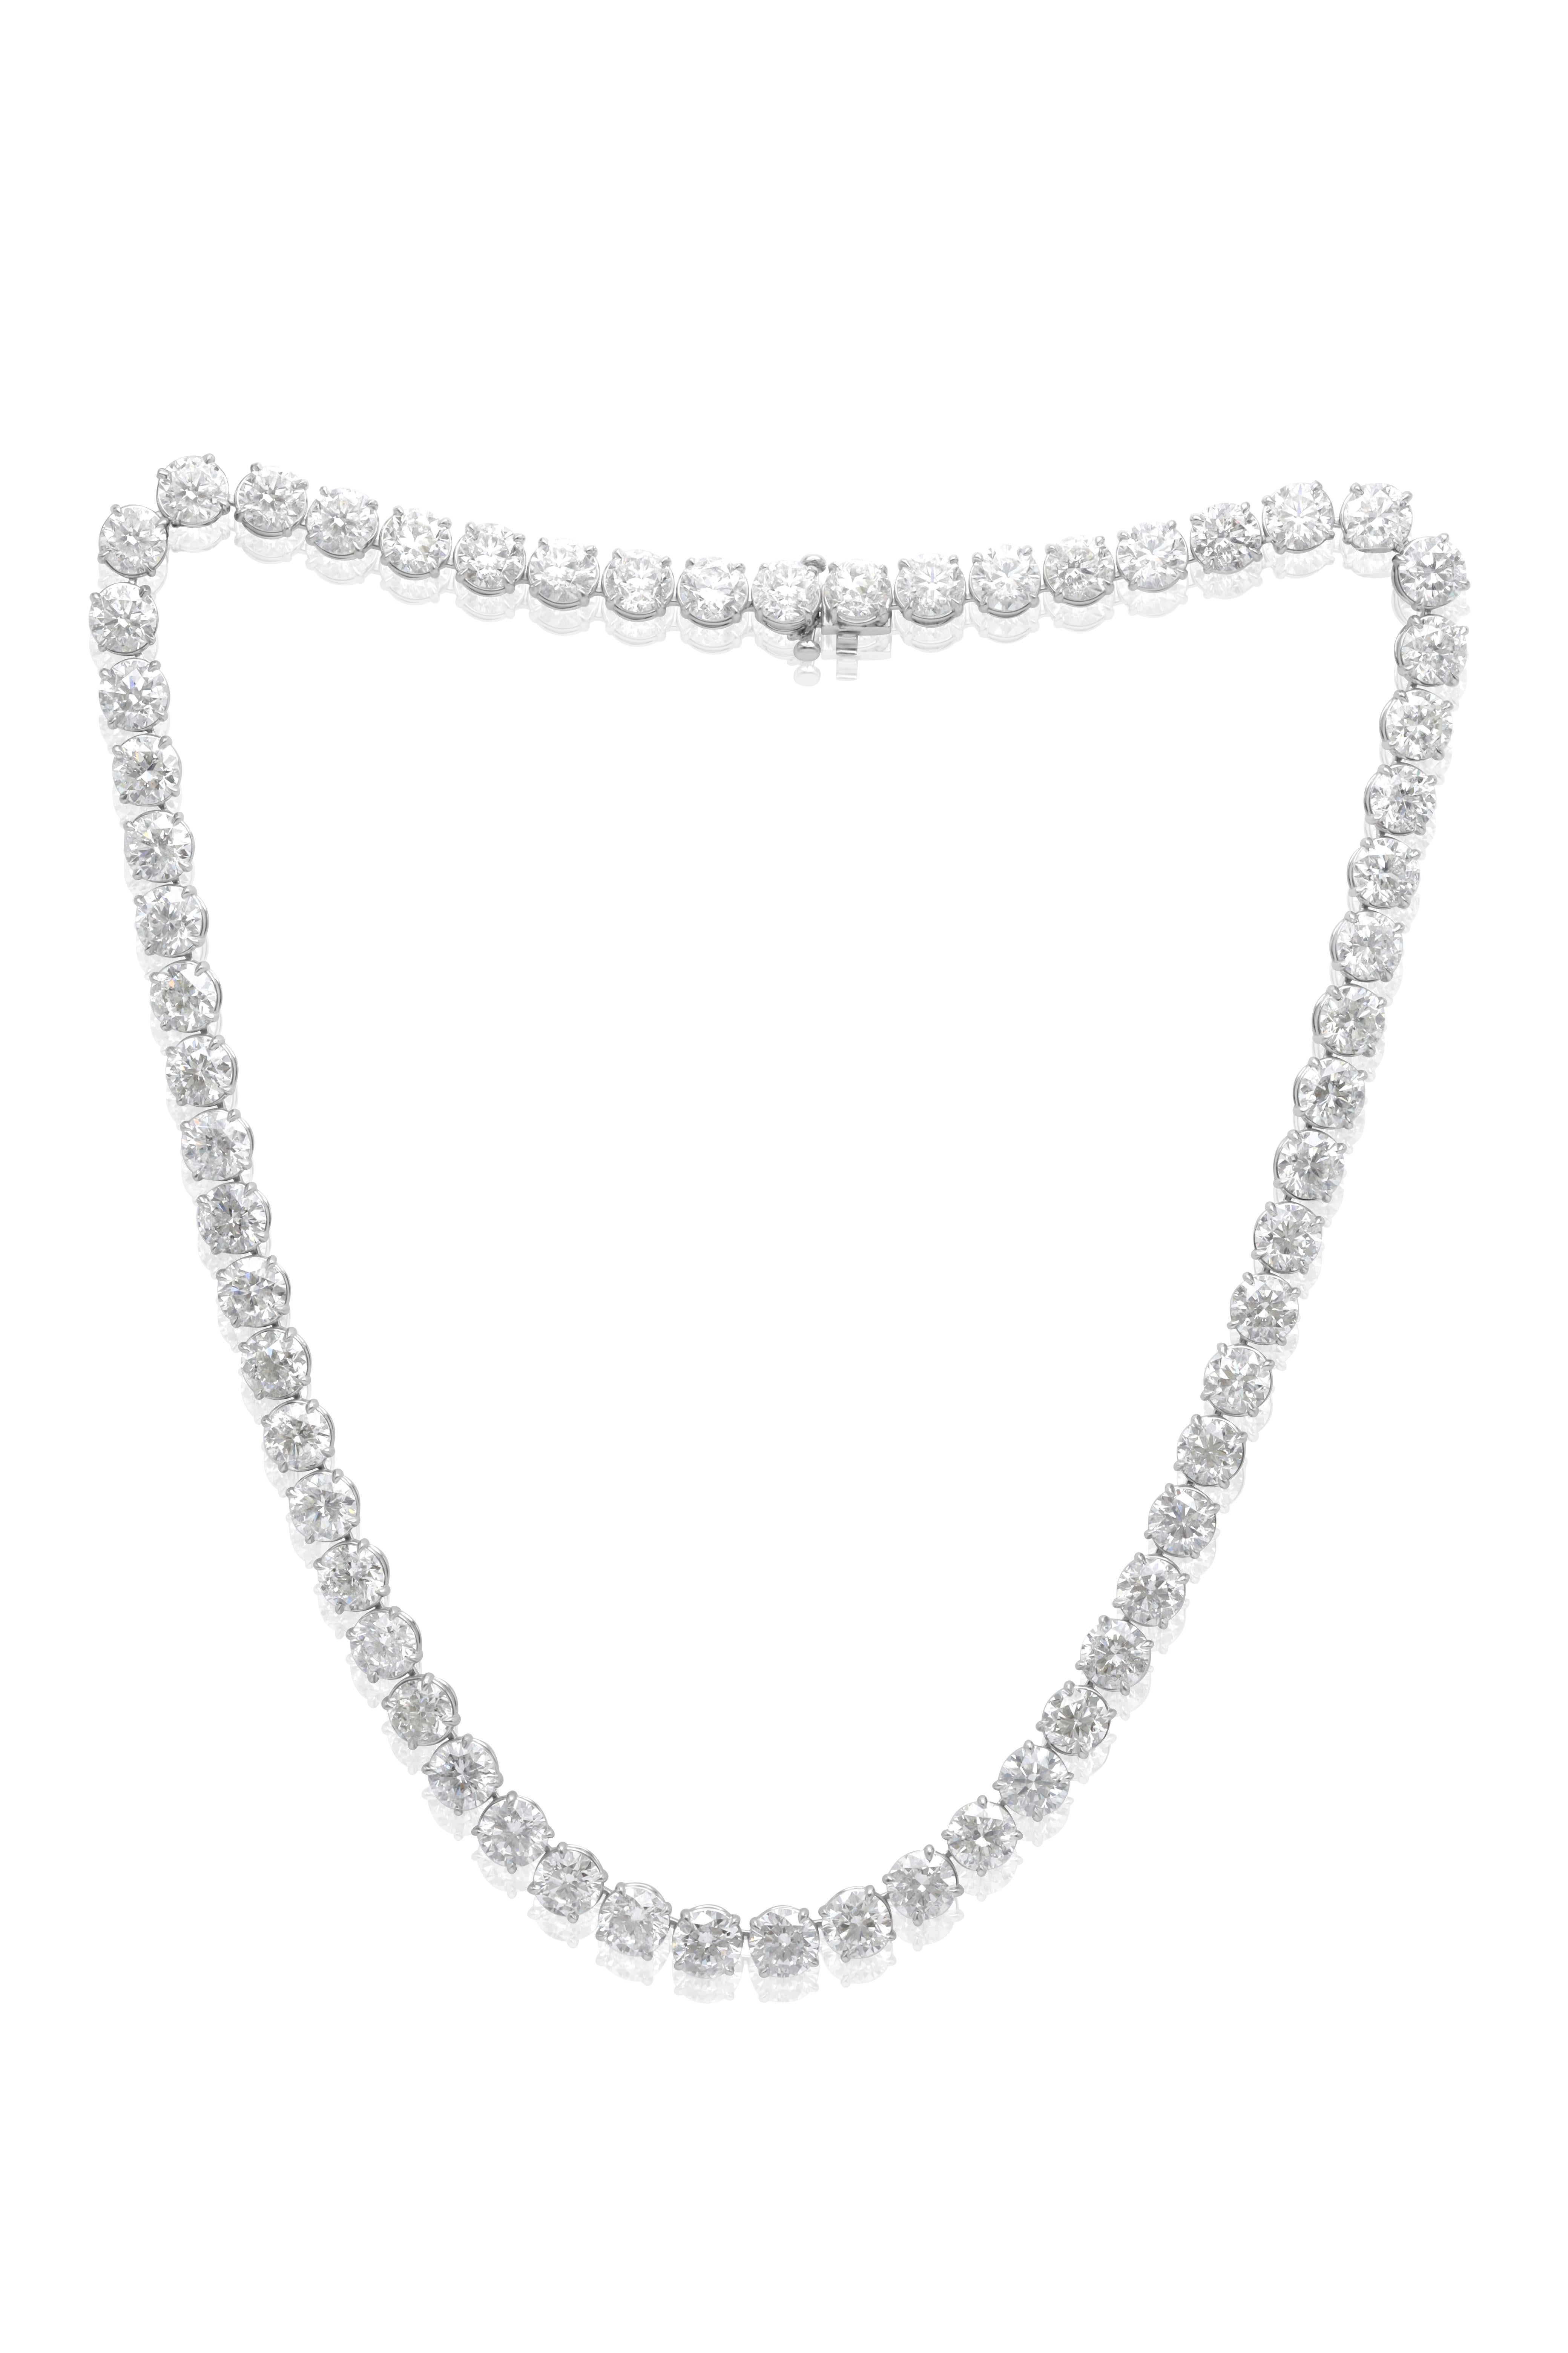 Modern Diana M. Custom 40.30 Cts 4 Prong  Diamond 18k White Gold Classic  Necklace  For Sale